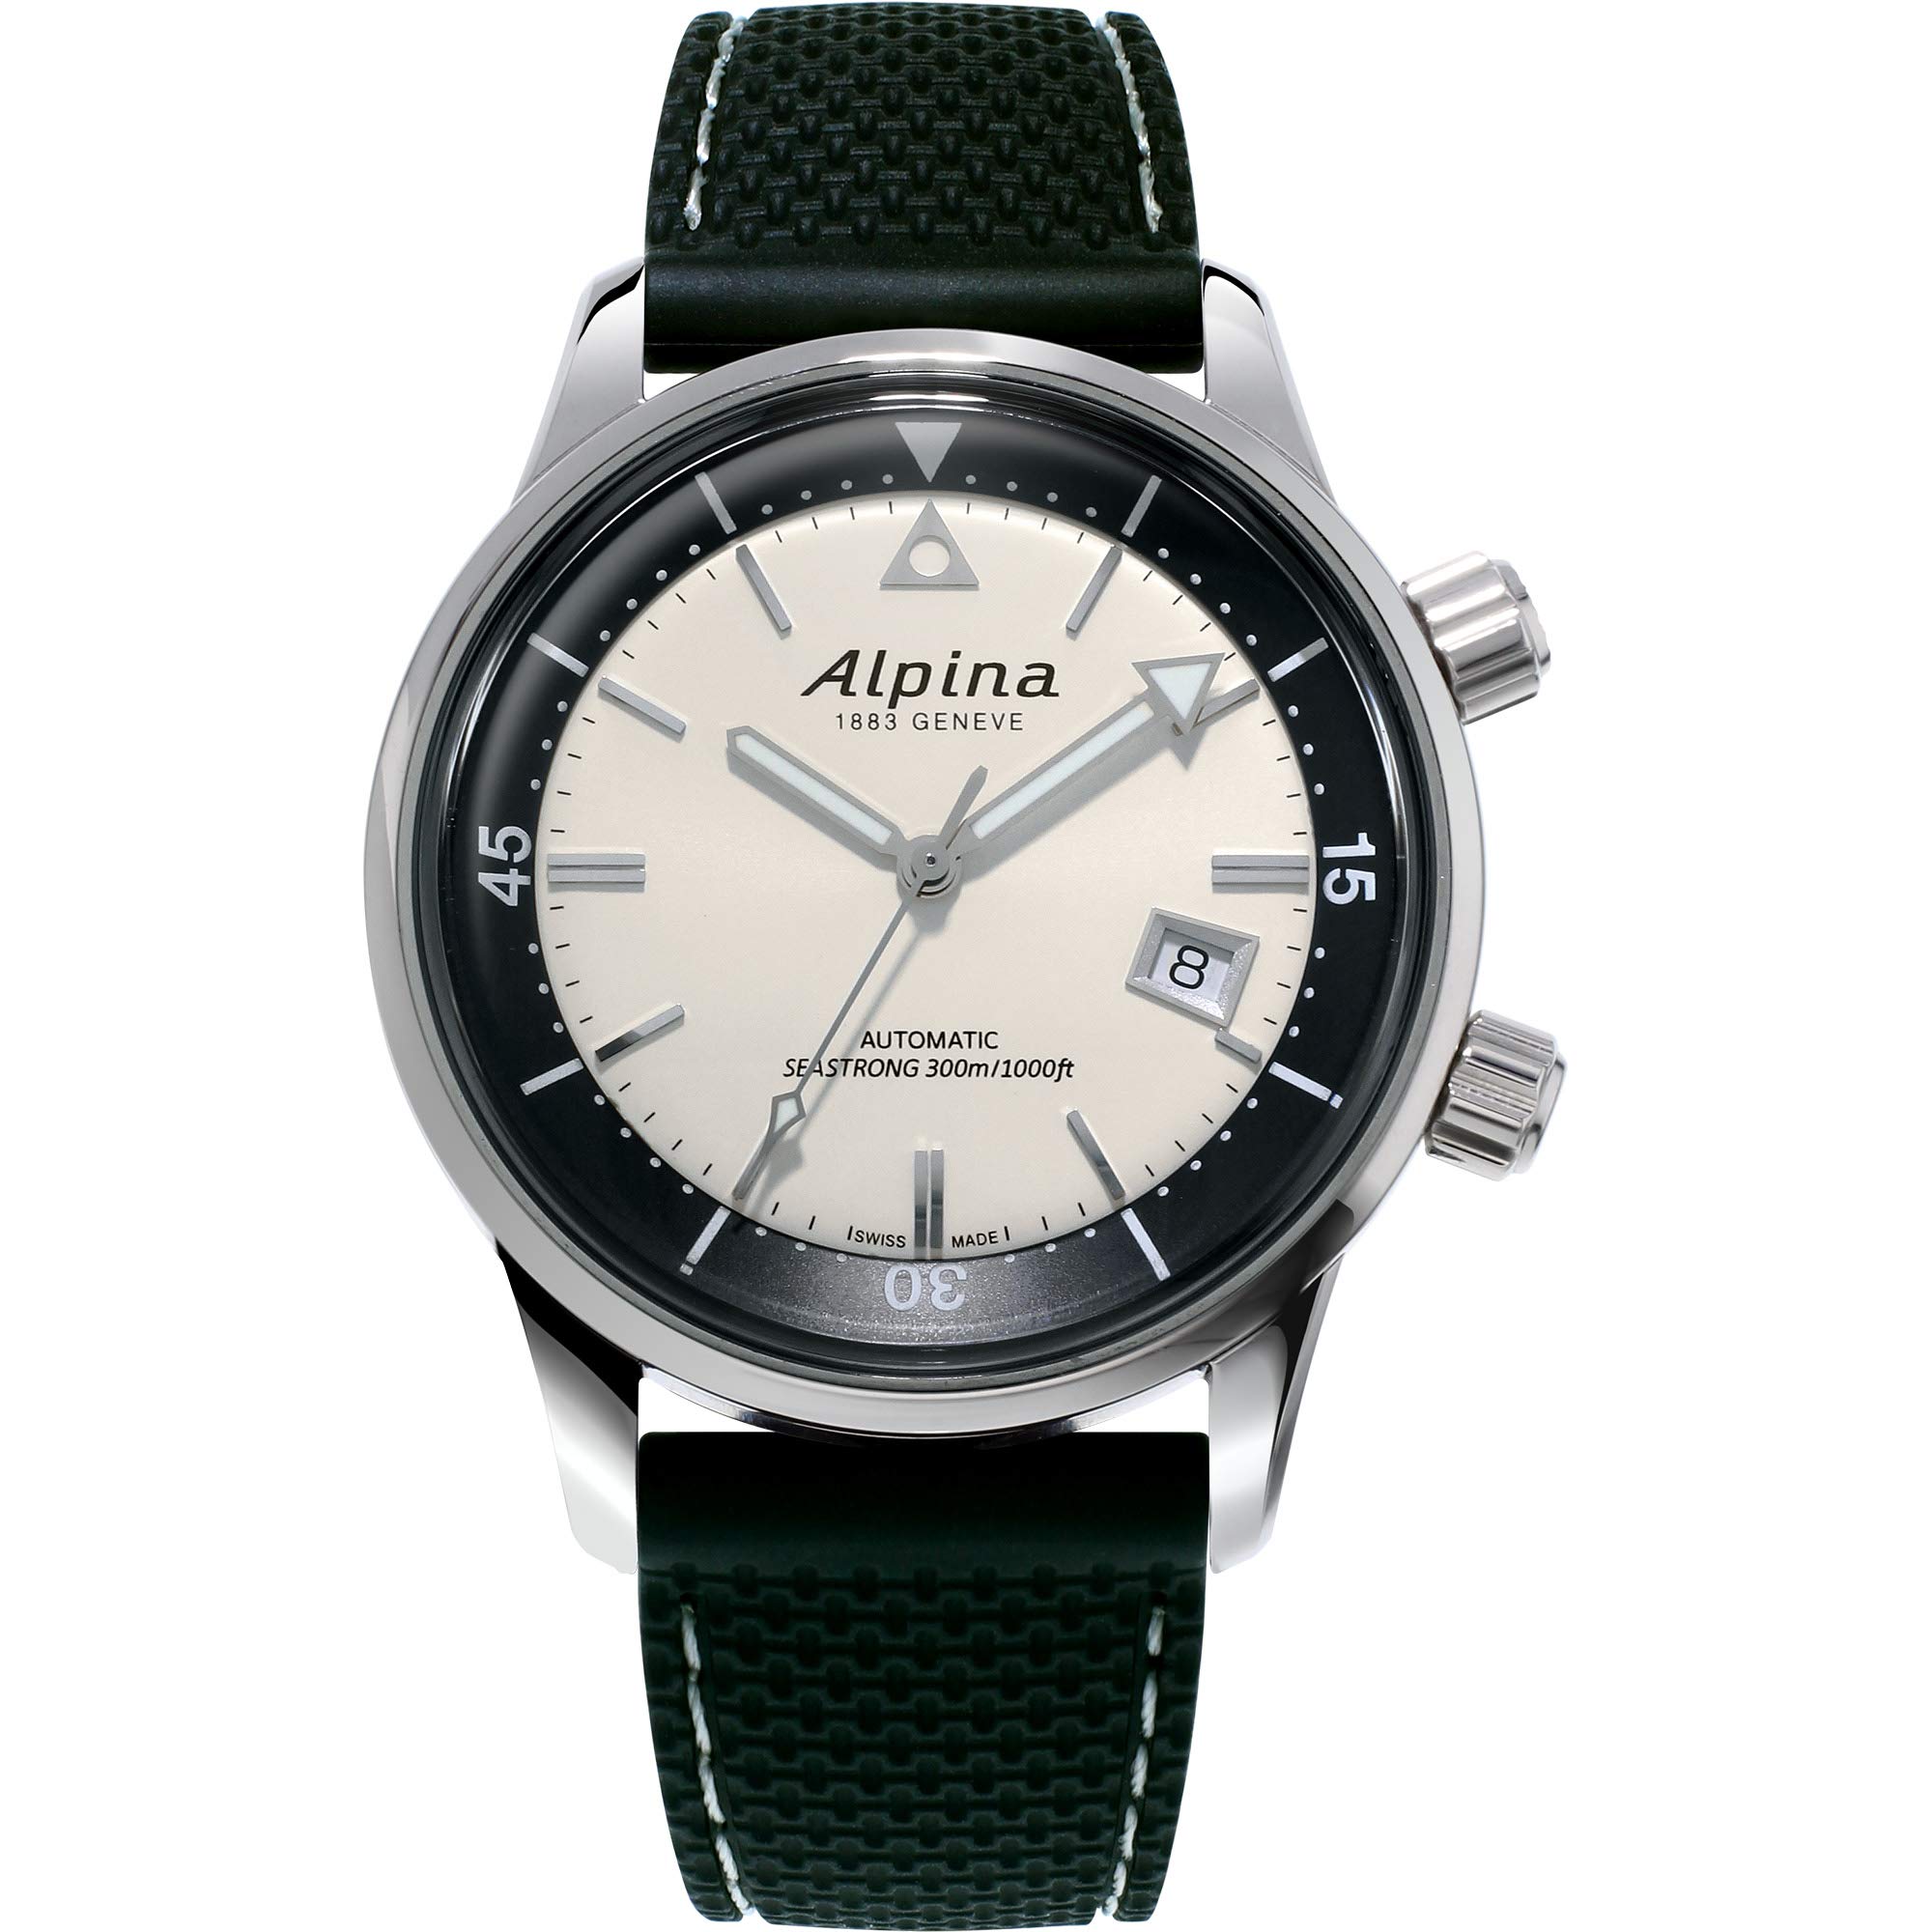 Alpina Men's AL-525S4H6 Seastrong Diver Hertiage Analog Display Automatic Self Wind Black Watch